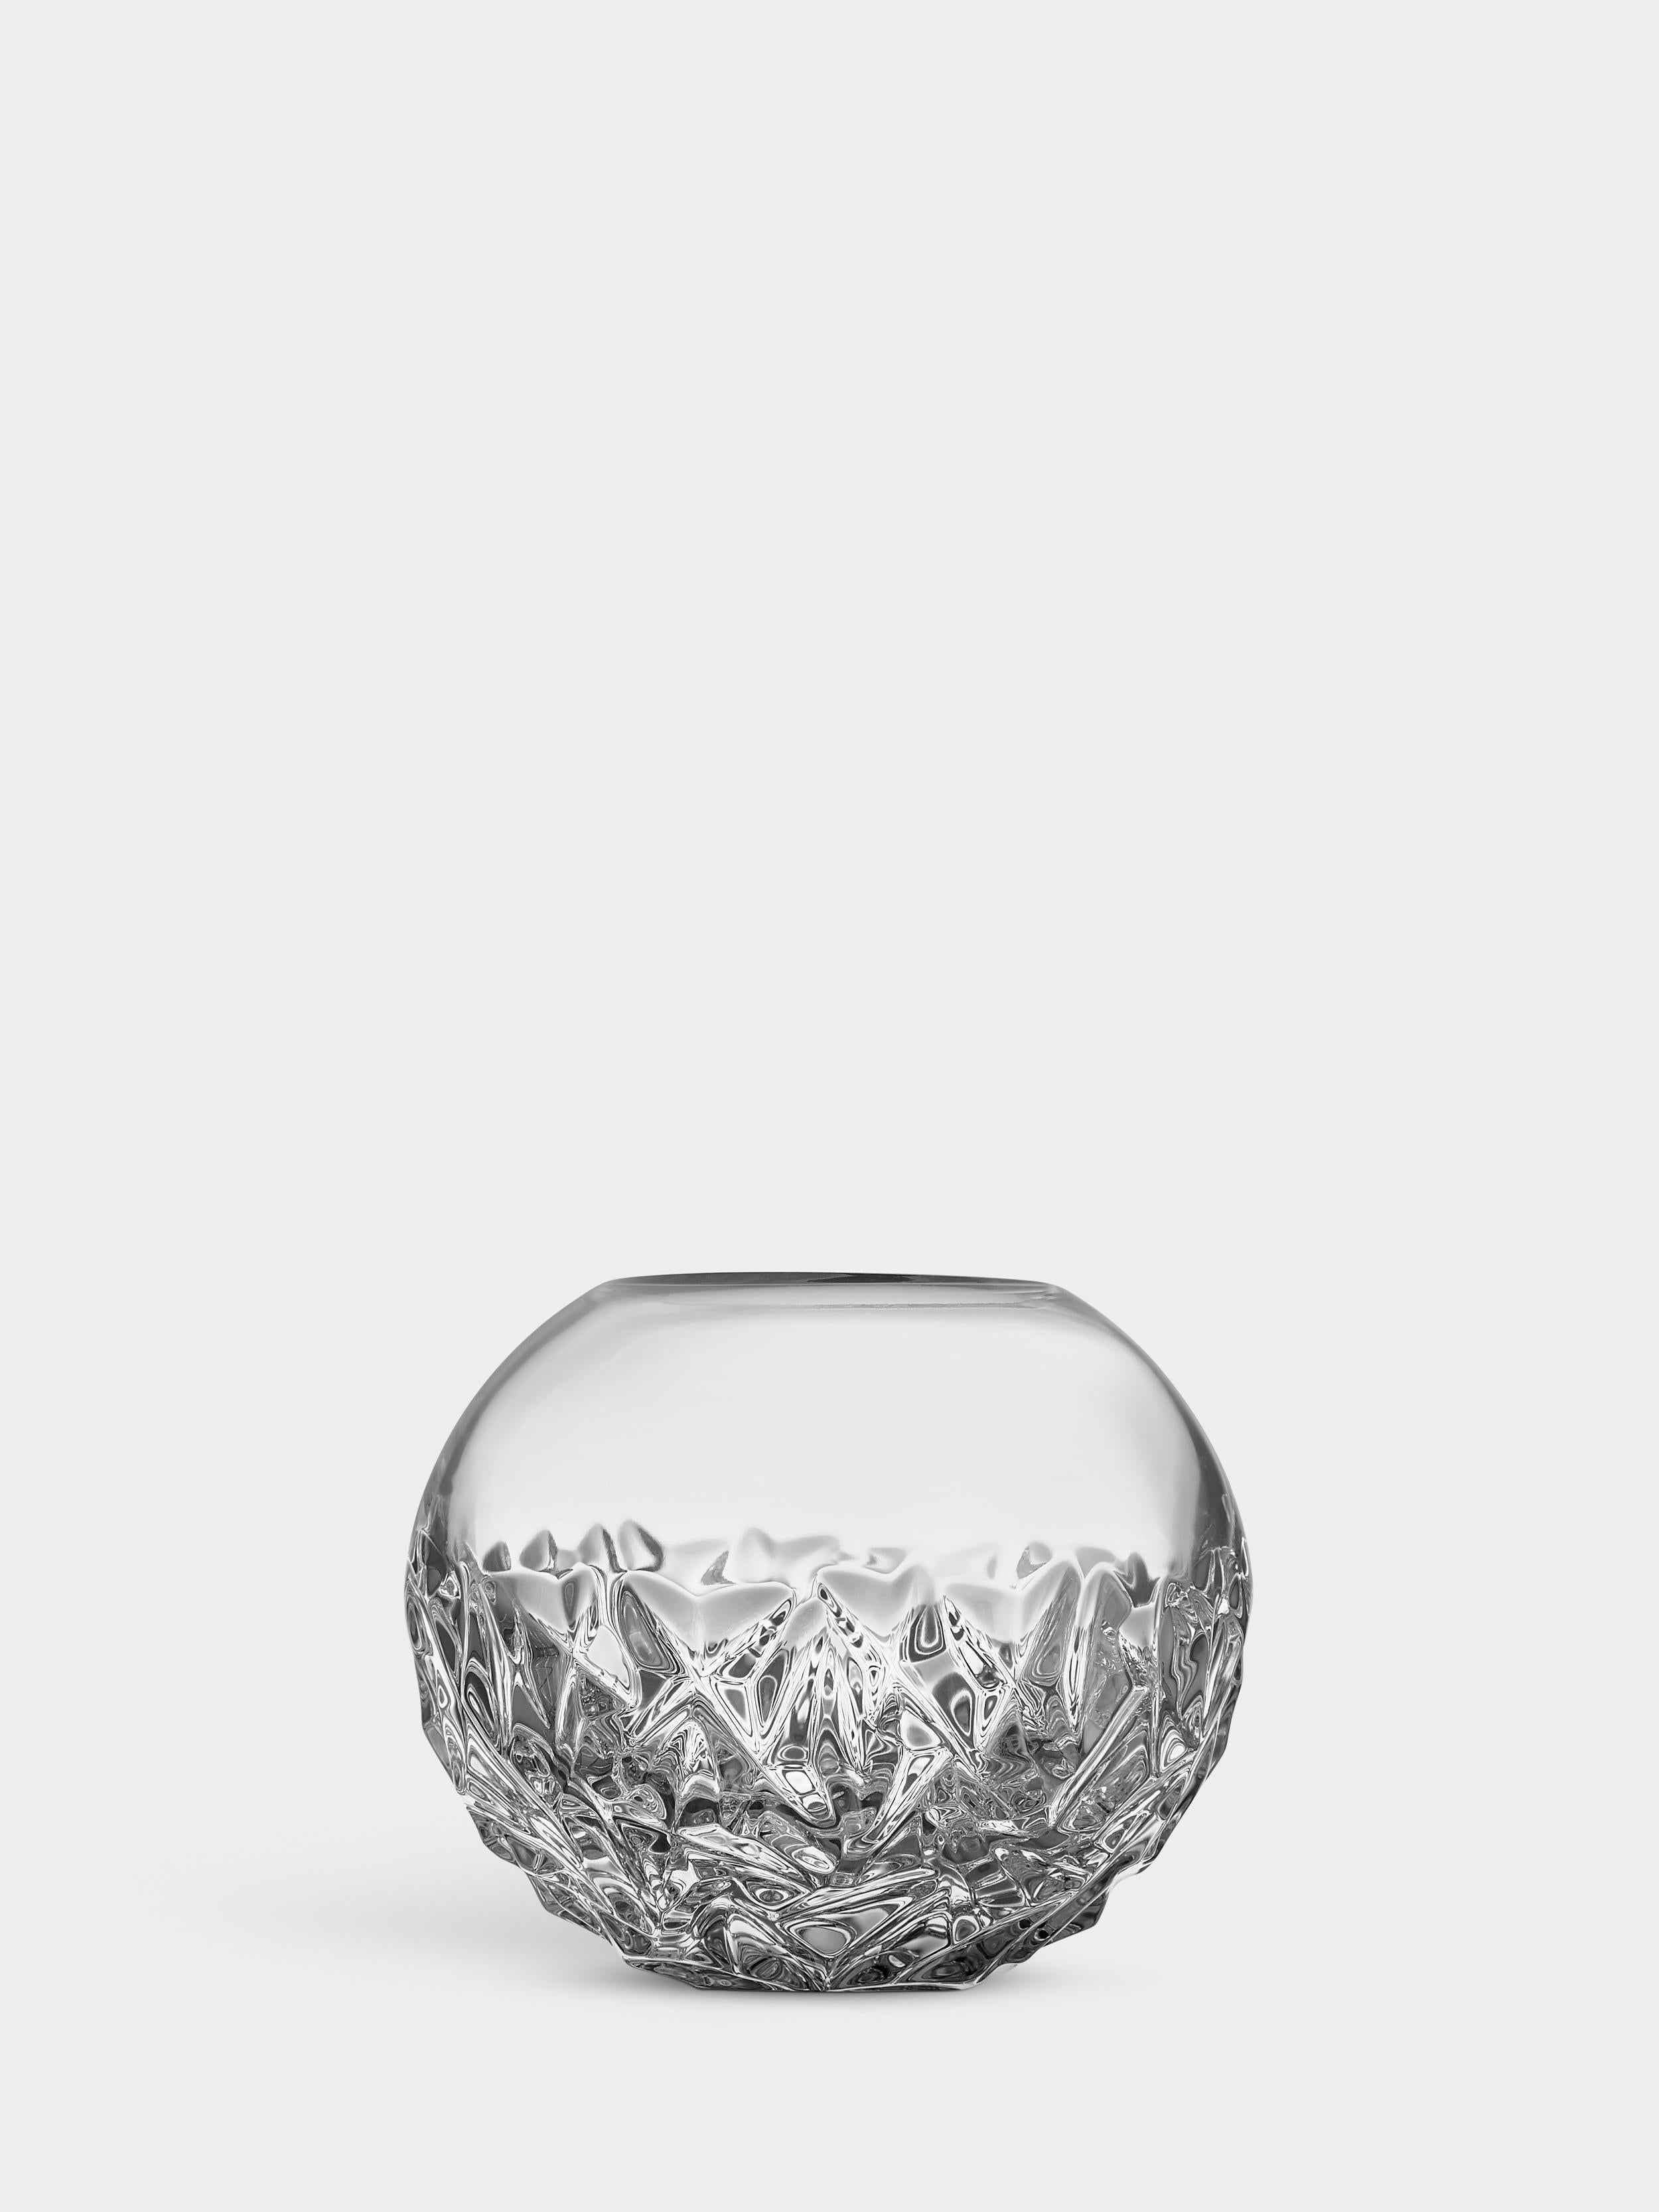 The Carat collection is based on a contemporary interpretation of the traditional cut glass for which Orrefors is world-renowned. Carat Globe Vase Small has an asymmetrical motif at the base, which produces beautiful reflections of light in the